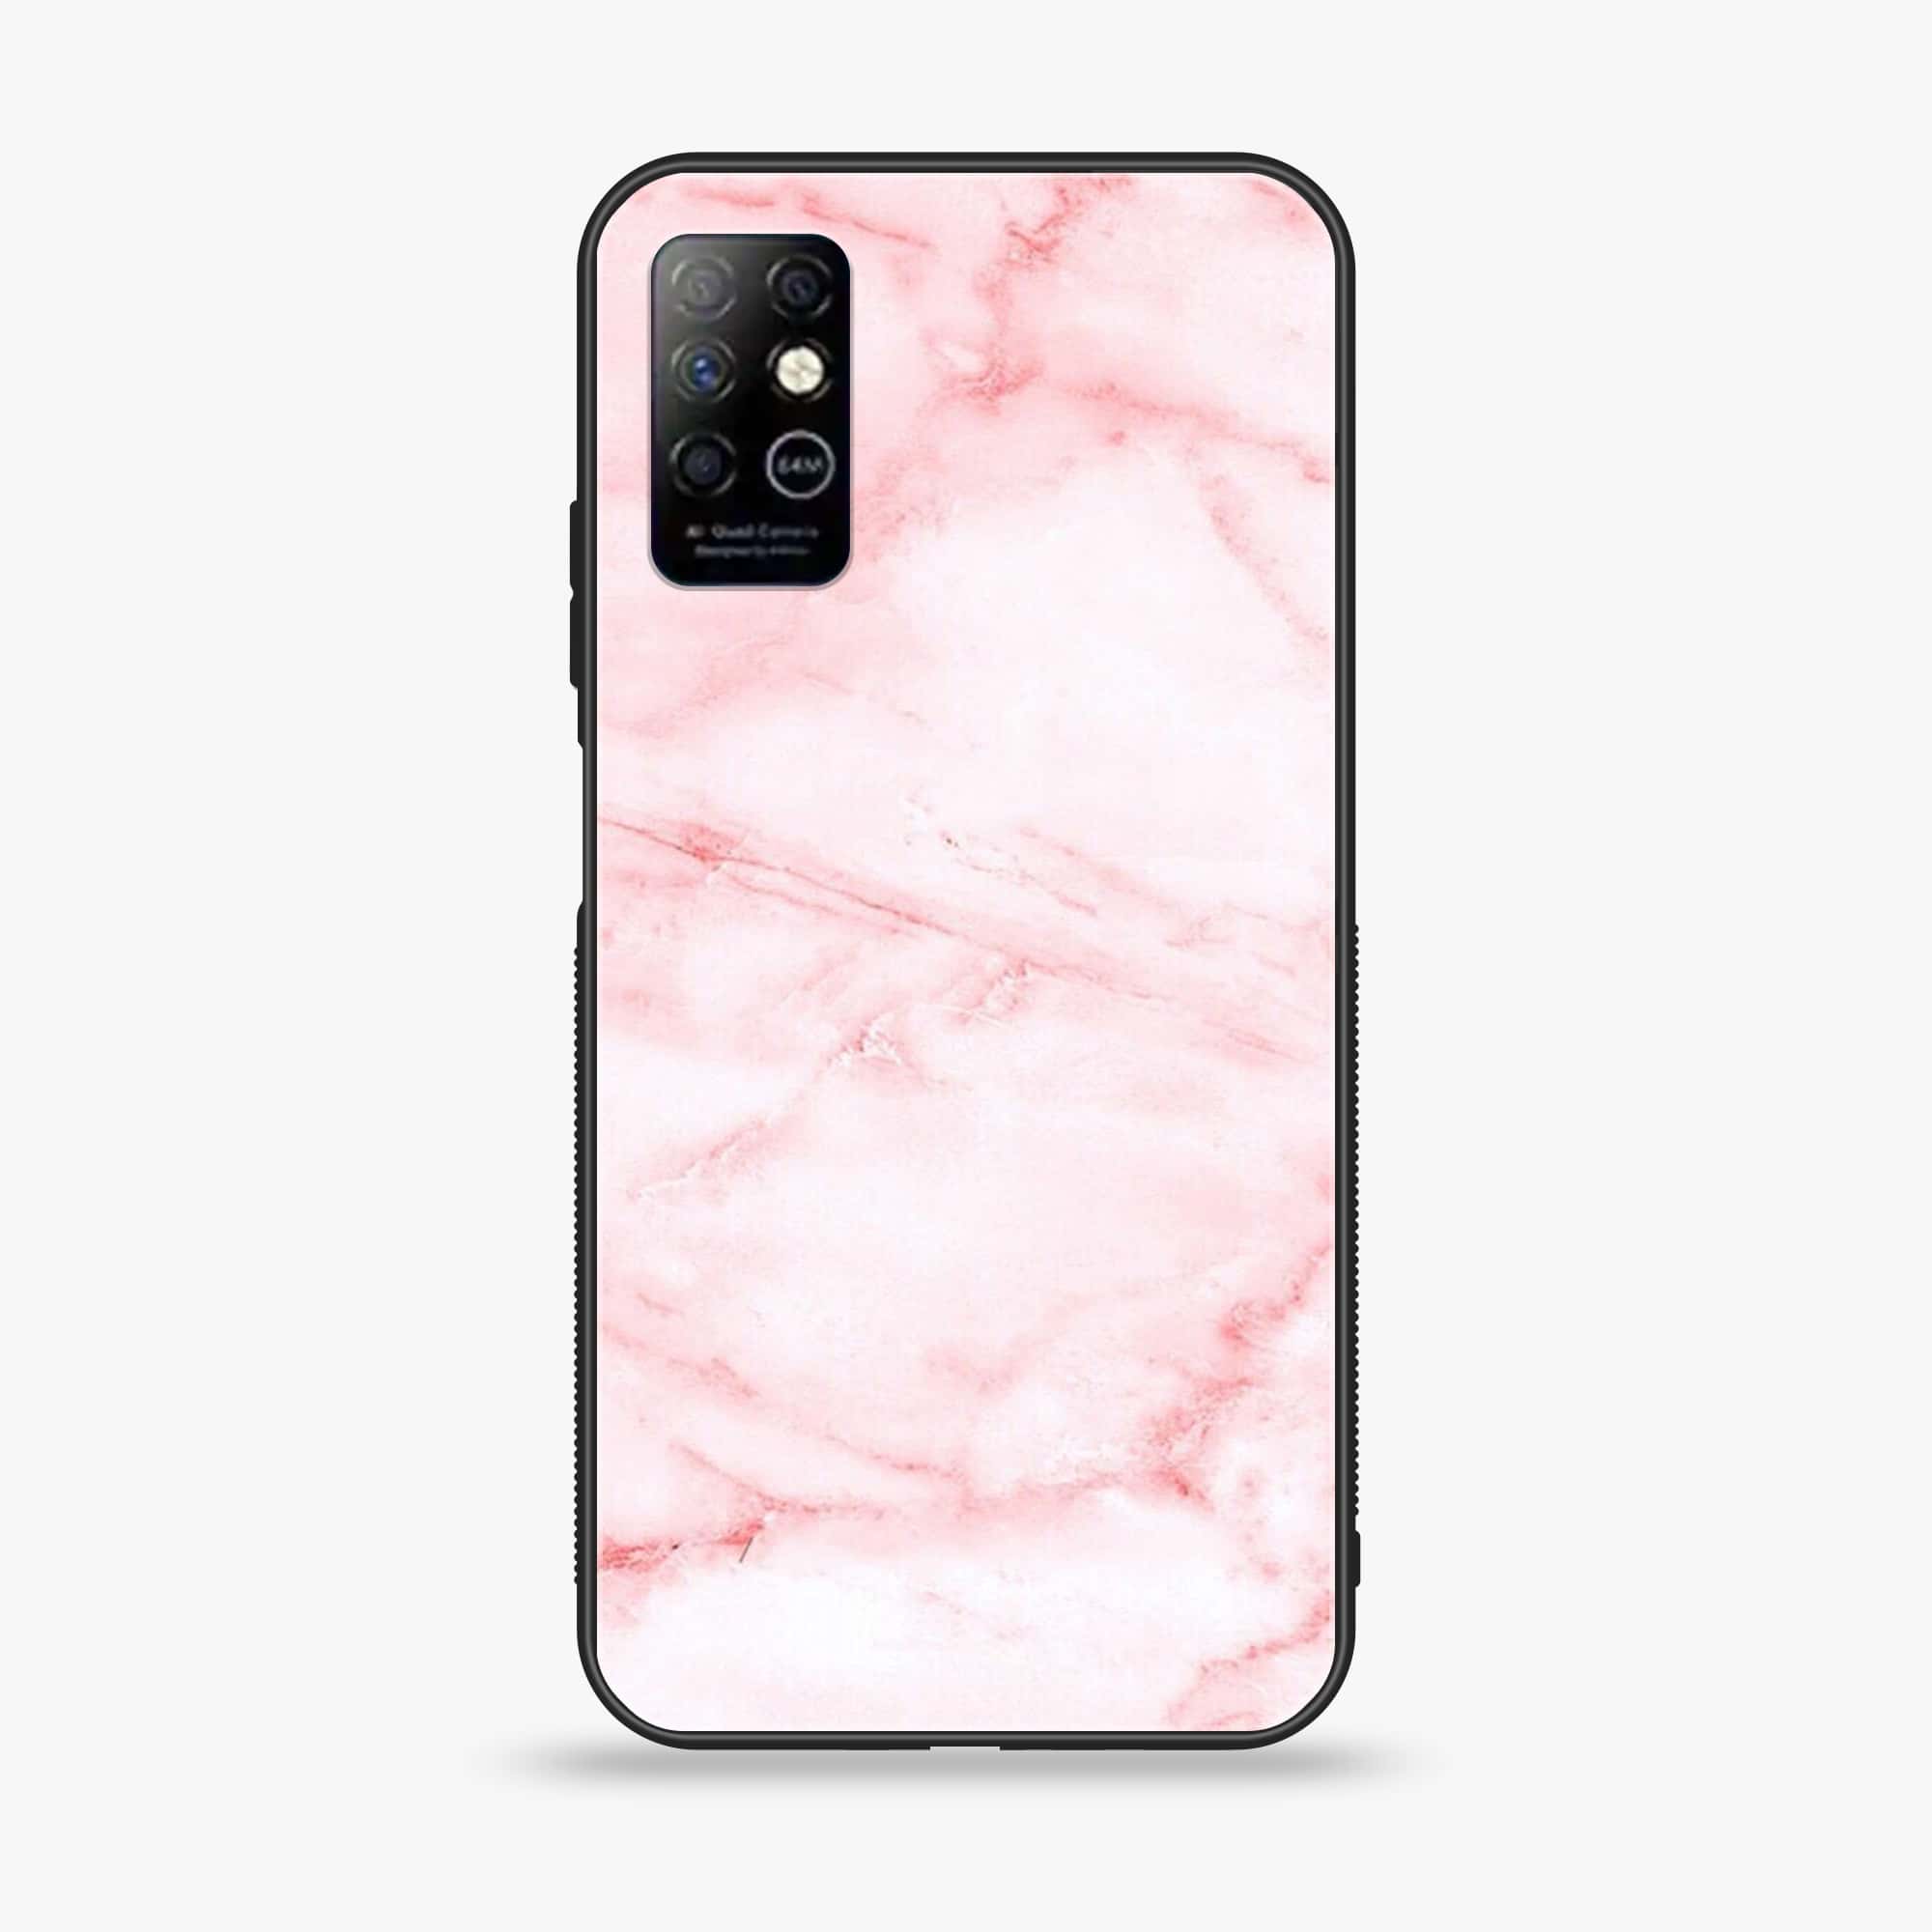 Infinix Note 8 - Pink Marble Series - Premium Printed Glass soft Bumper shock Proof Case